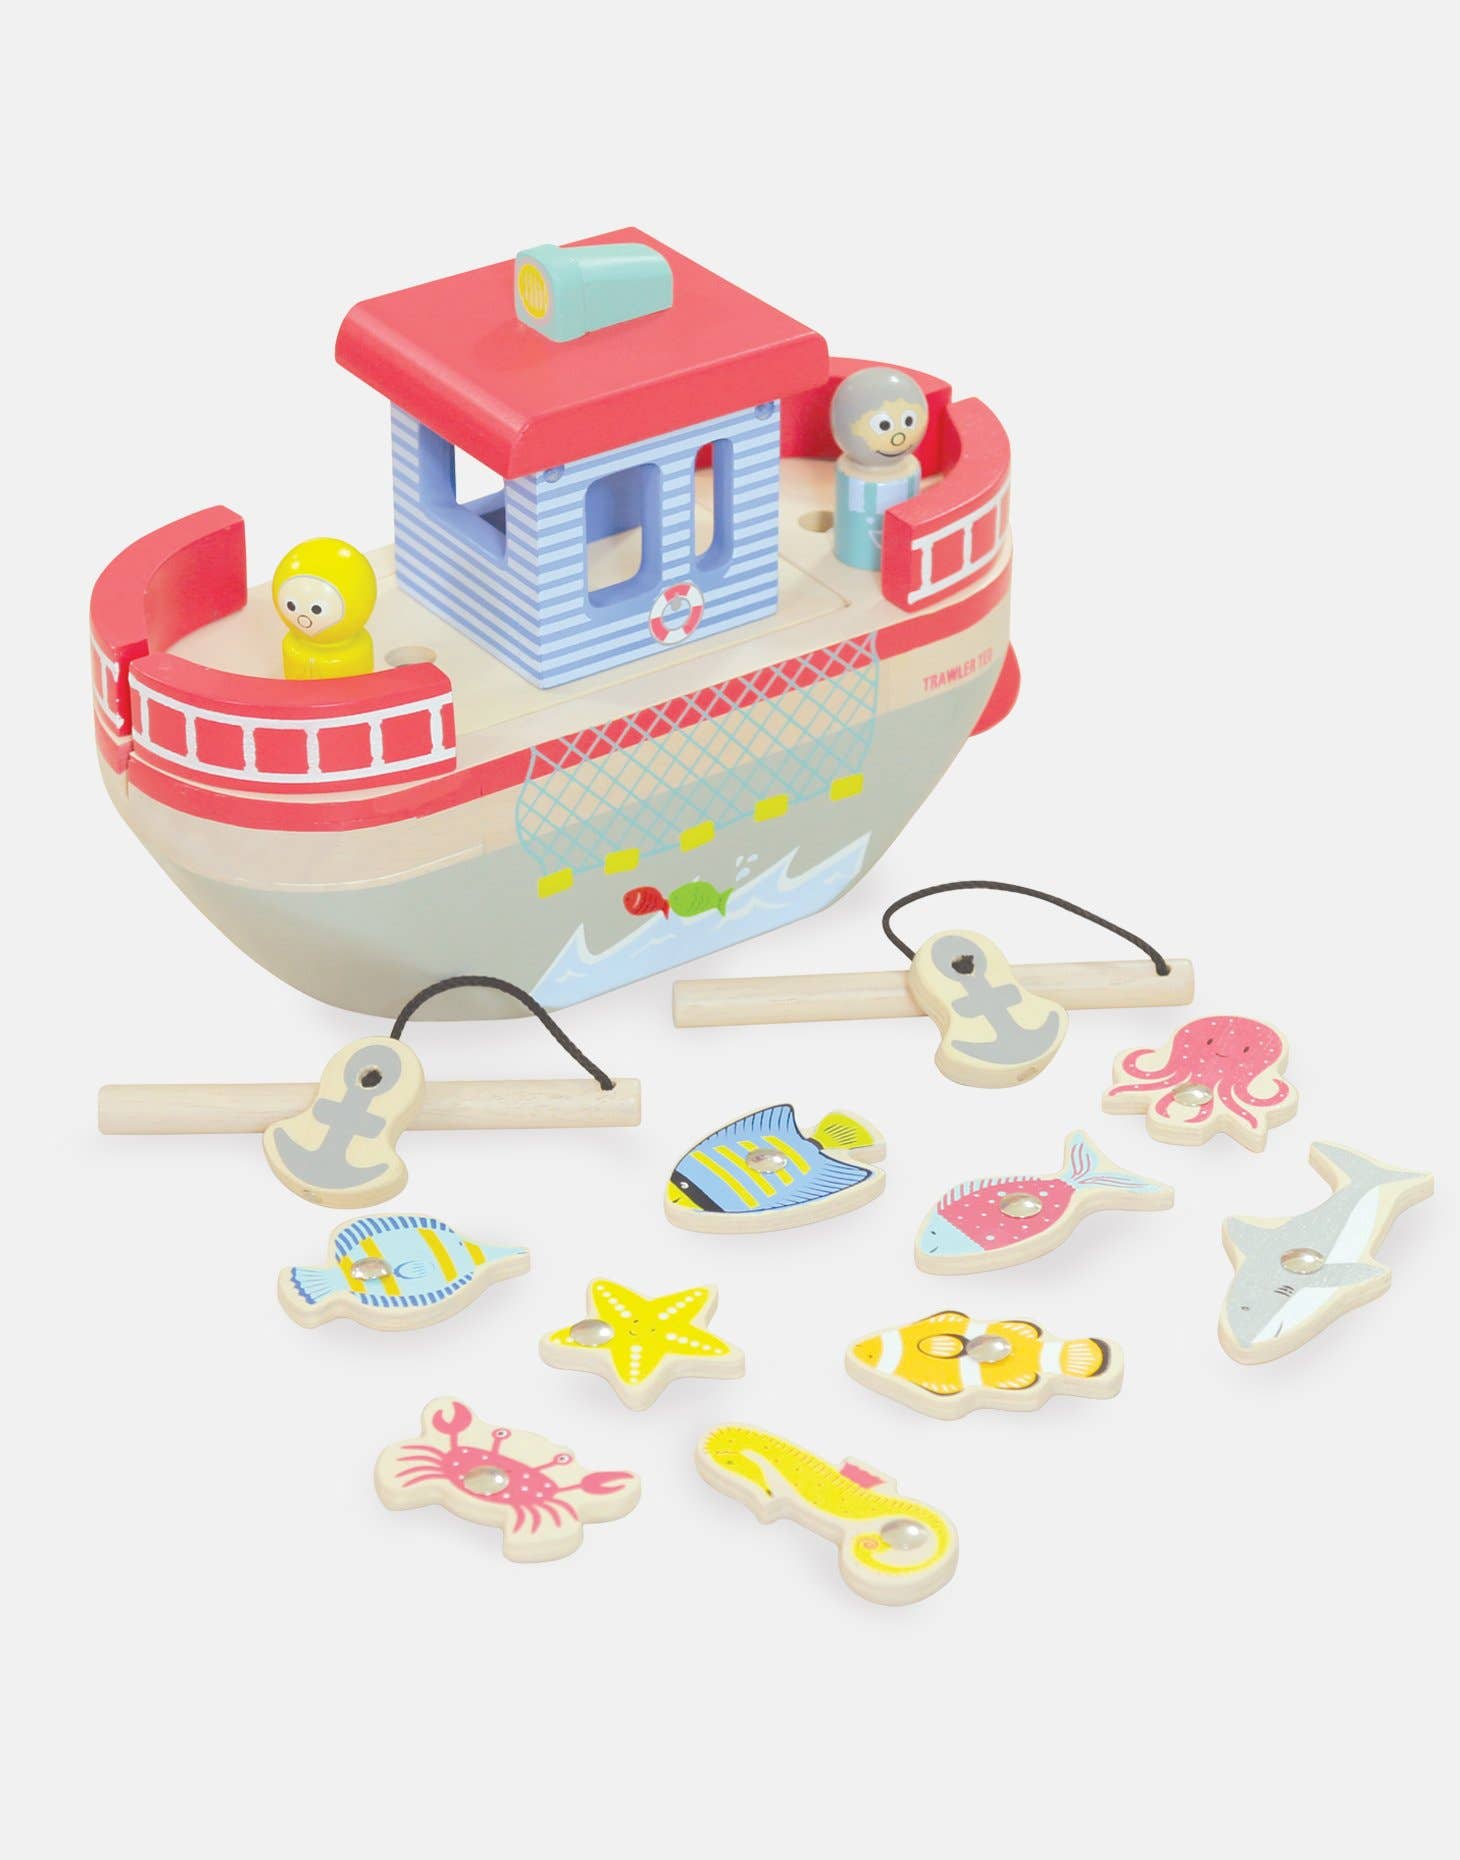 Trawler Ted Wooden Boat Toy Playset with Removable Passengers and Magnetic Fishing Game Including Fish for 2 3 4 Year Old Boy and Girls